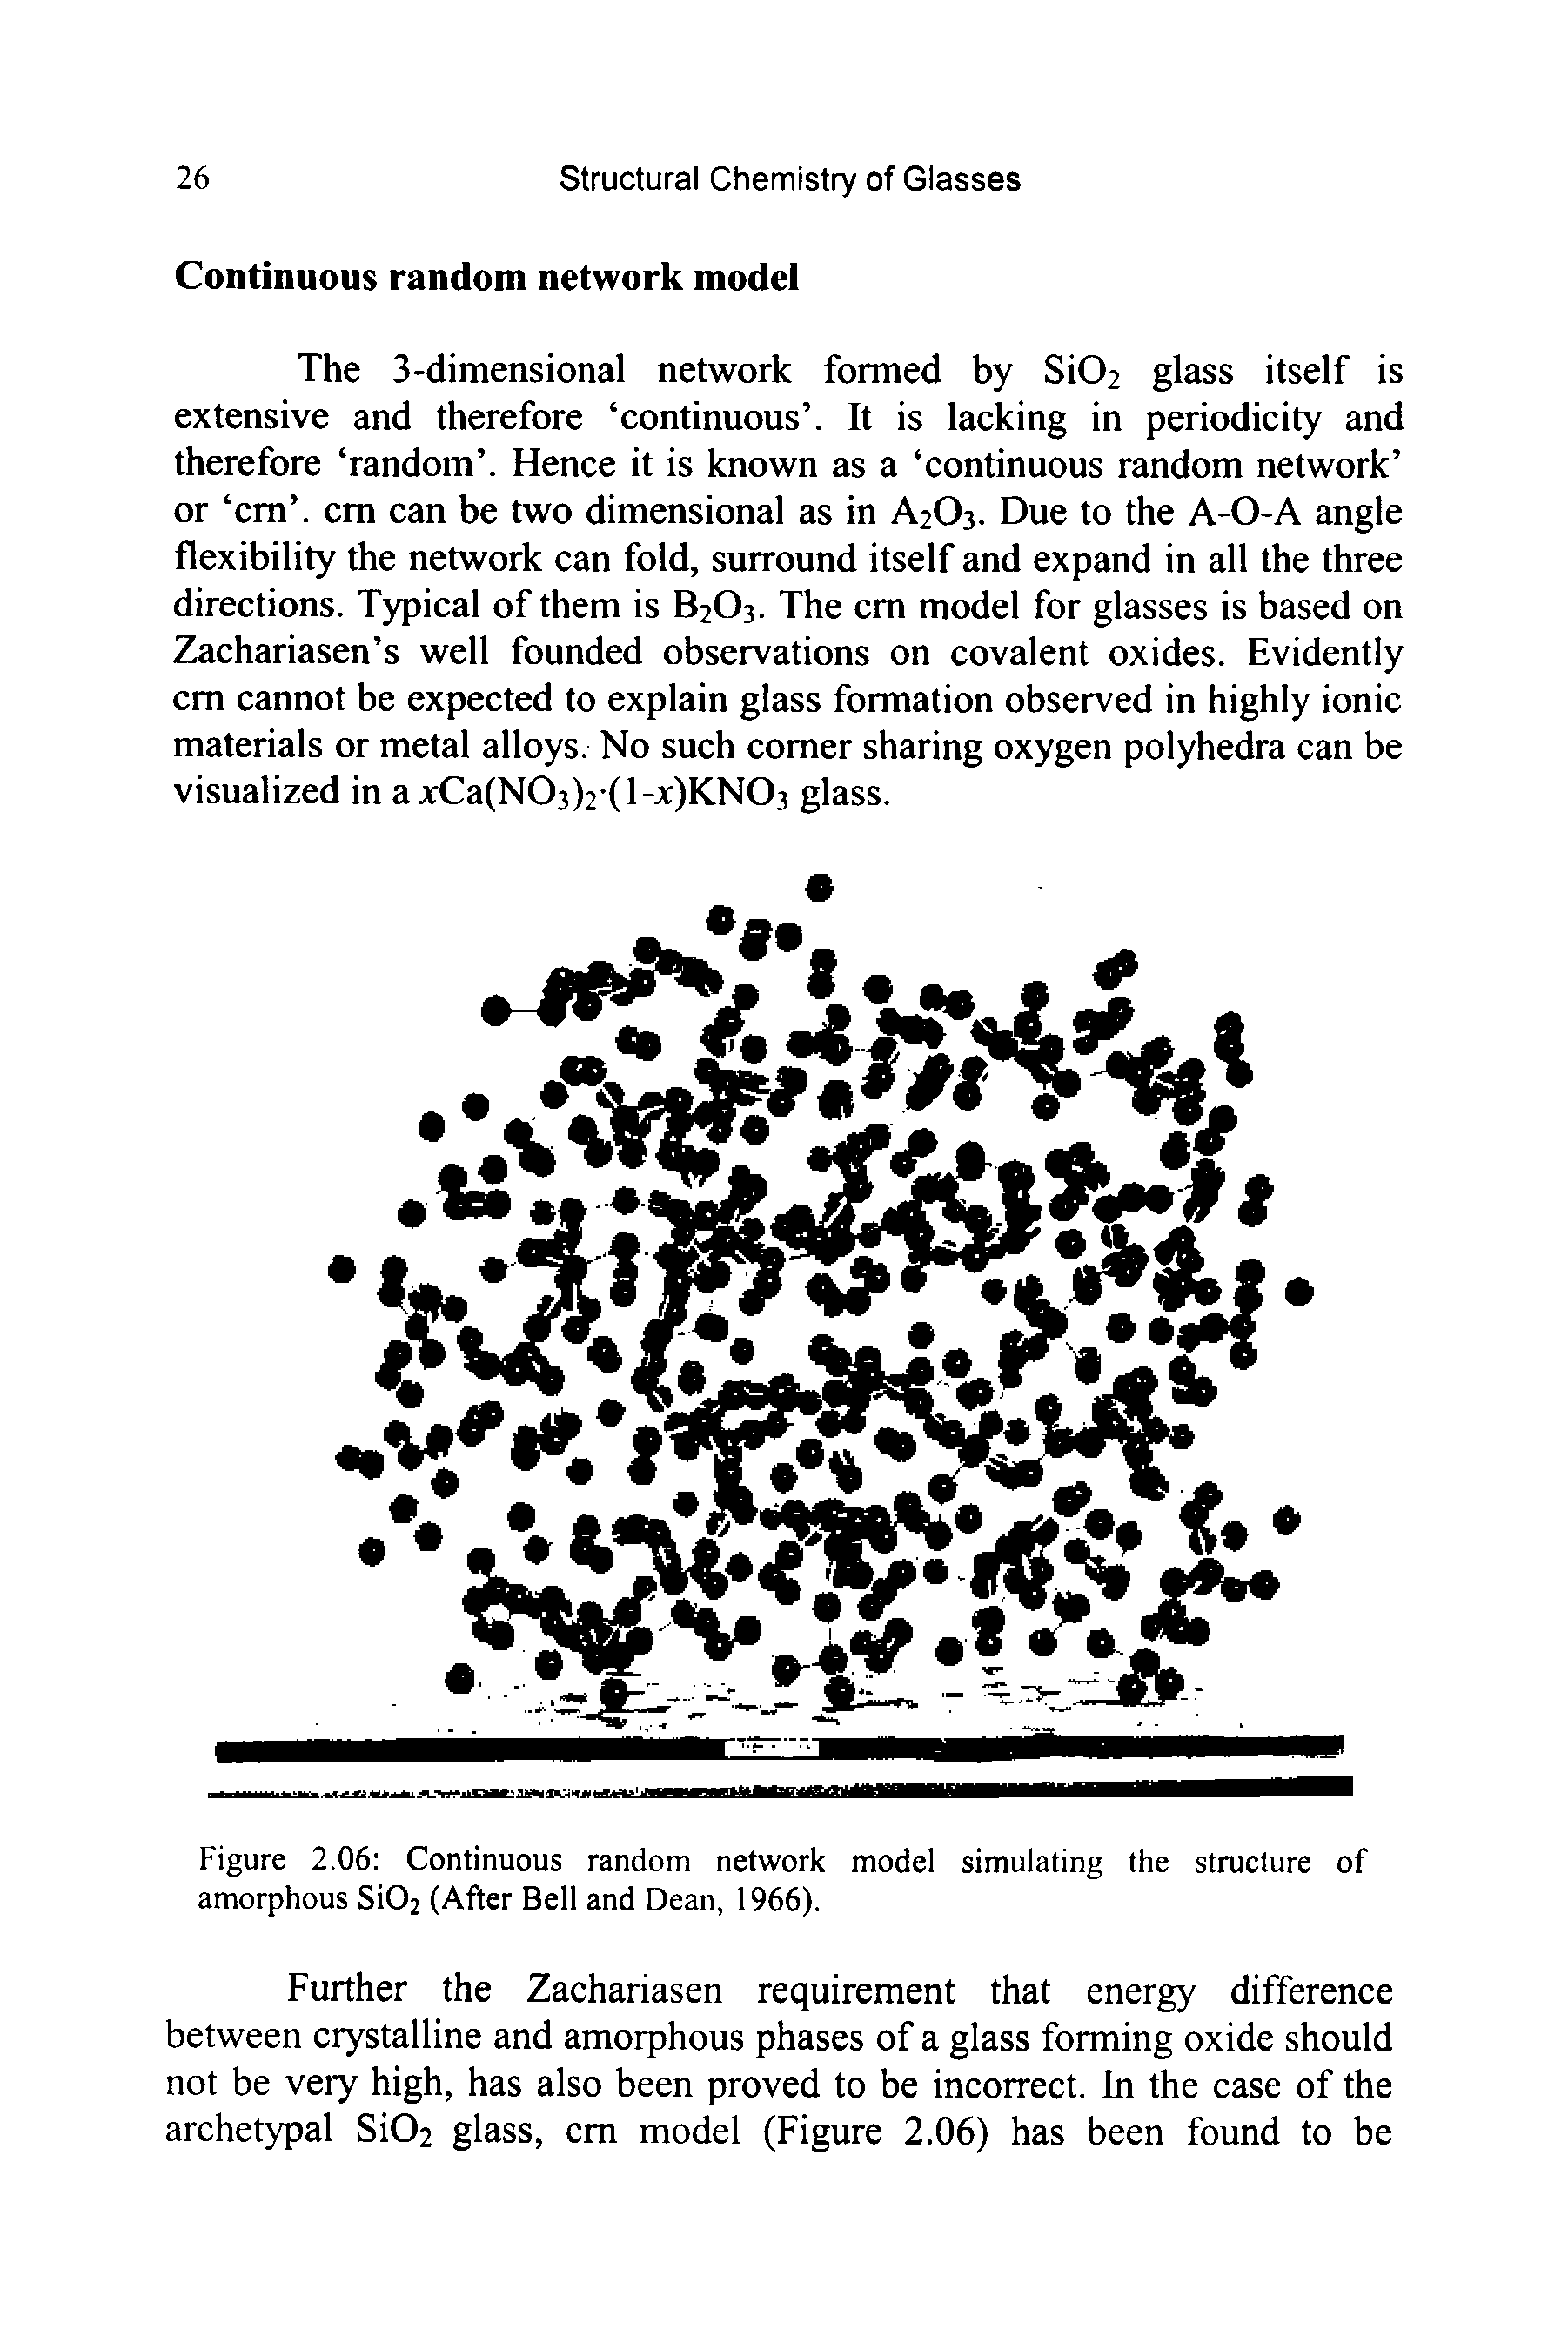 Figure 2.06 Continuous random network model simulating the structure of amorphous Si02 (After Bell and Dean, 1966).